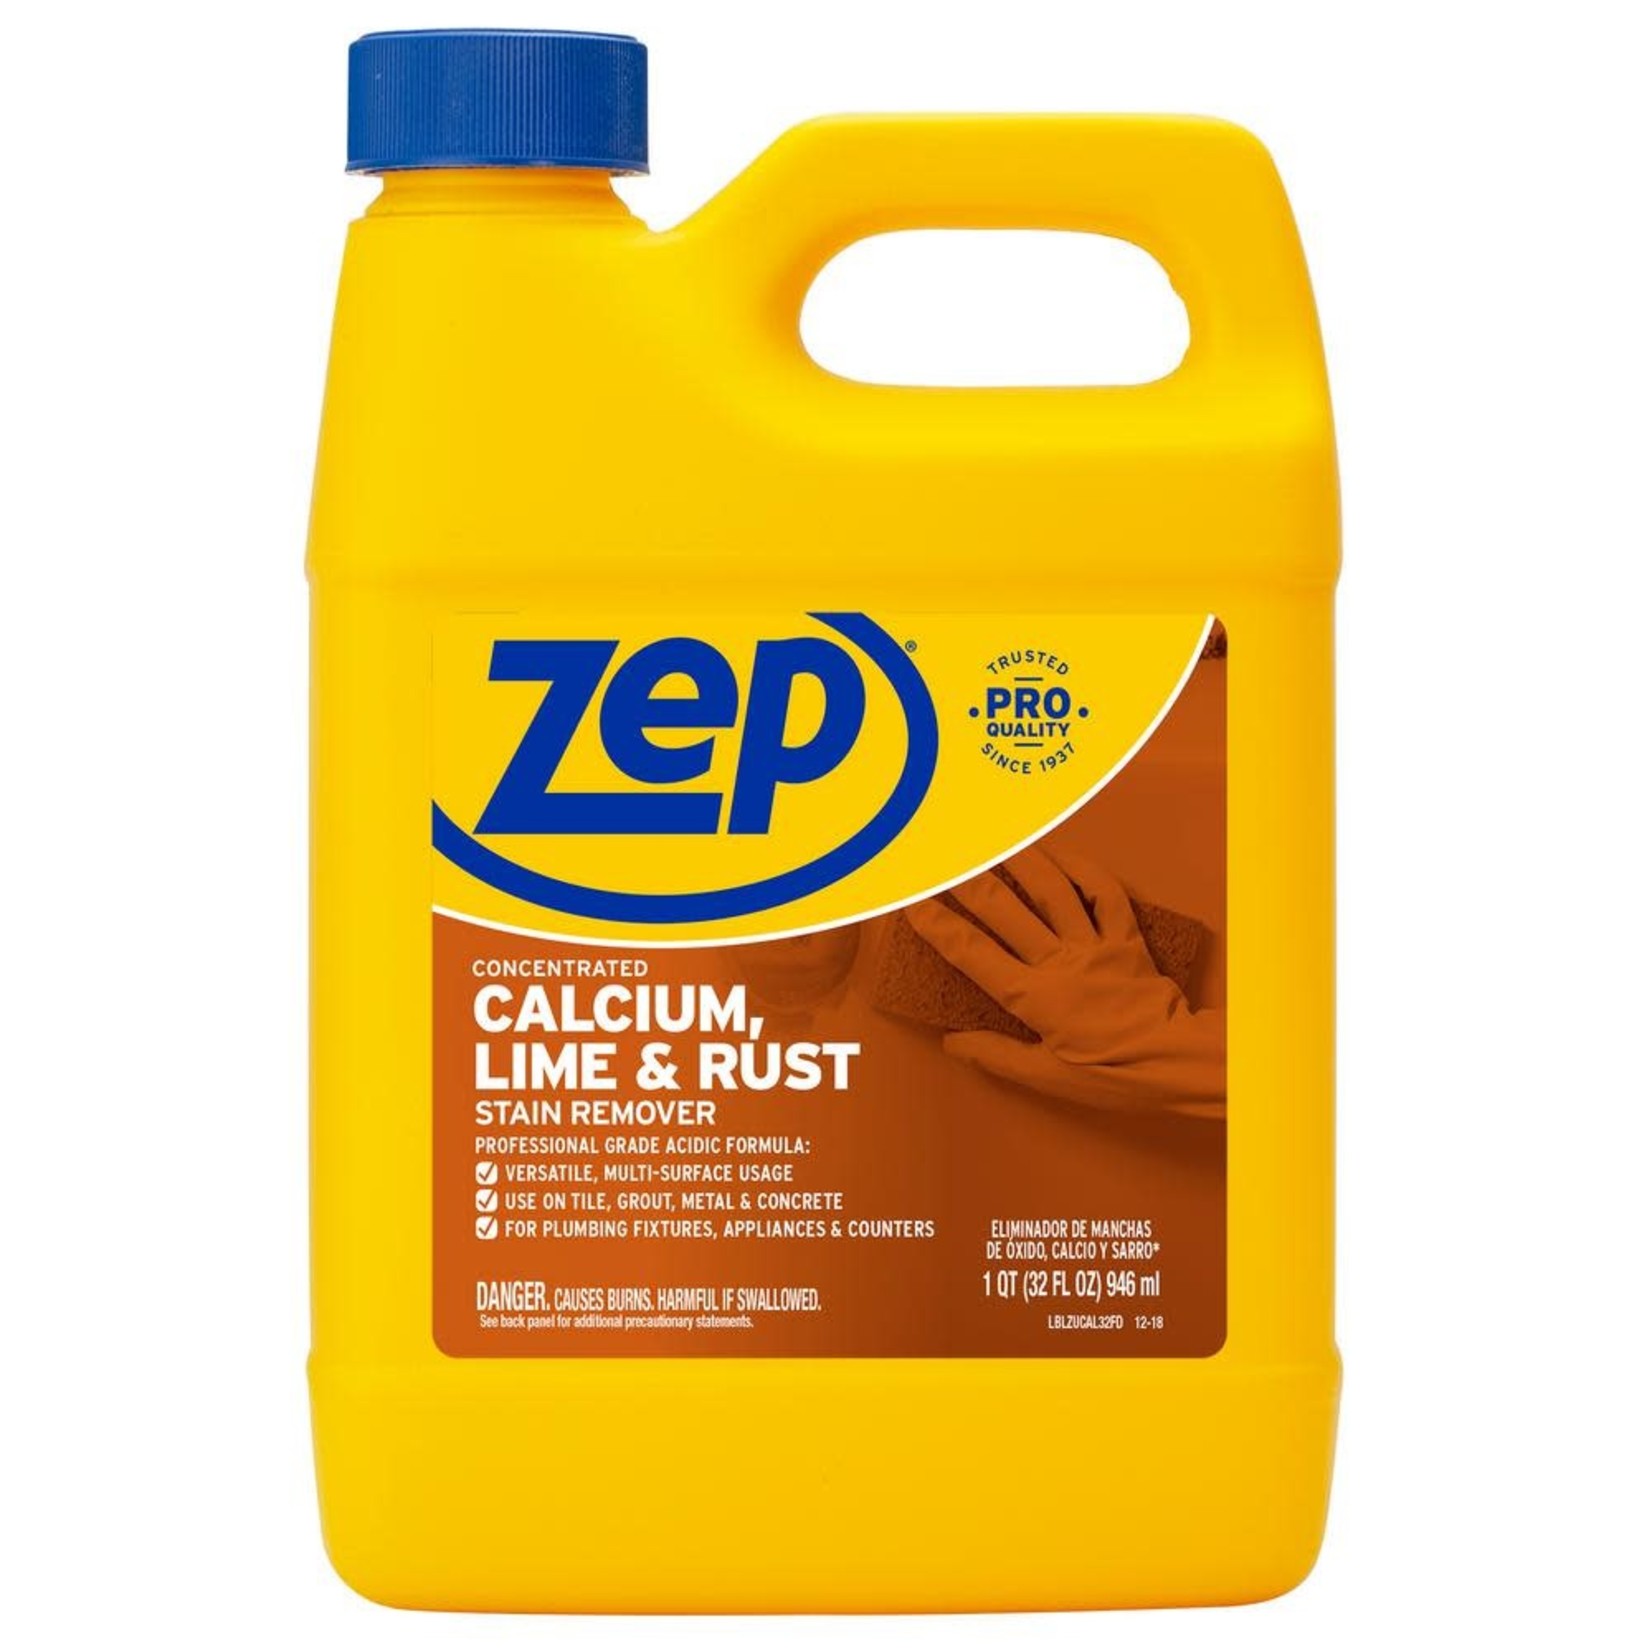 Zep ZEP Concentrated Calcium, Lime & Rust Stain Remover